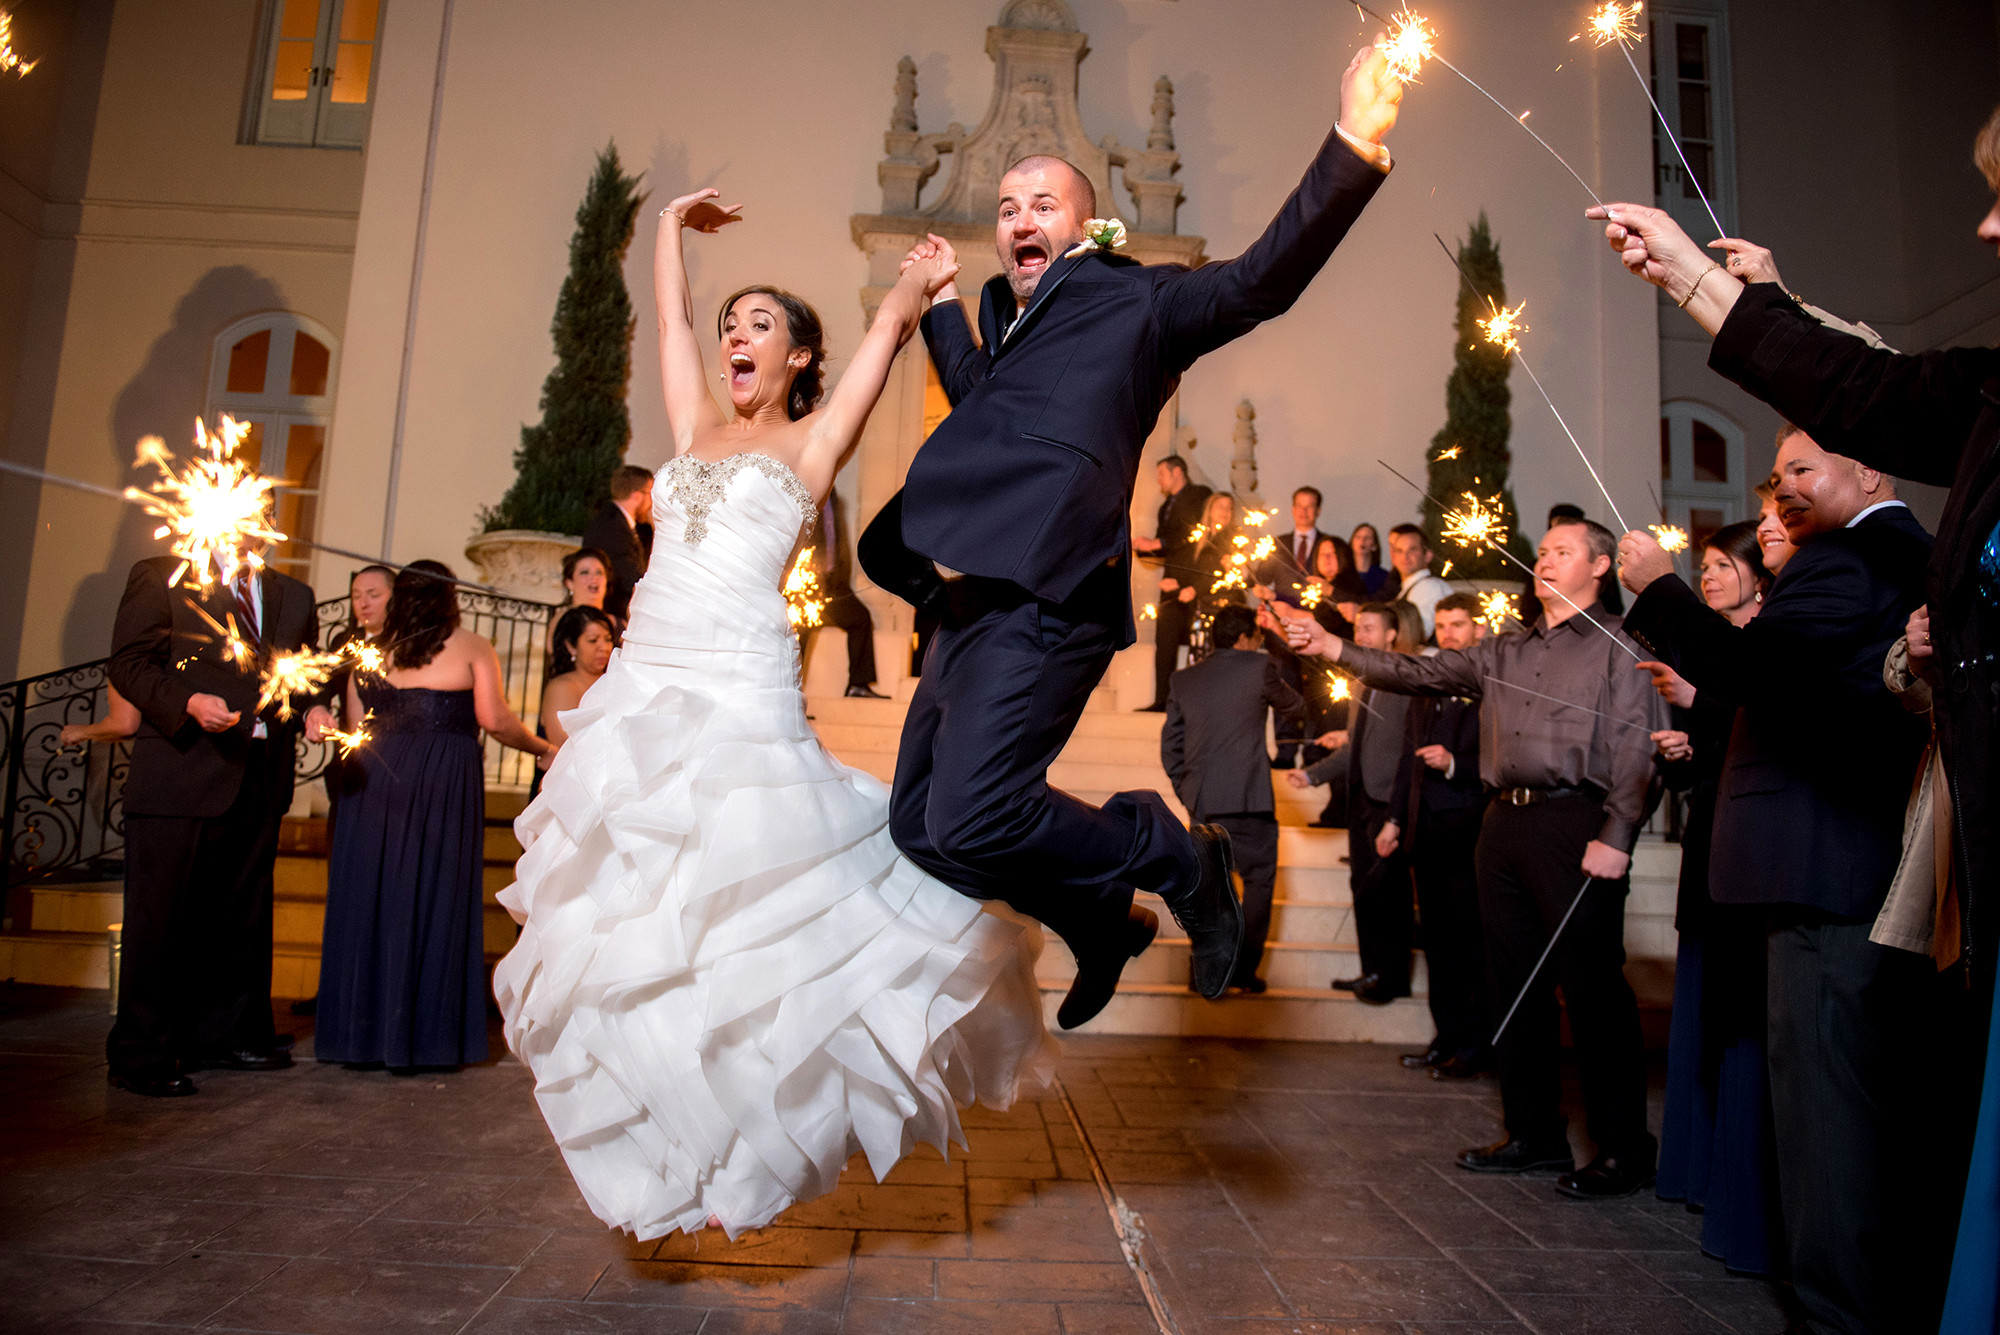 Wedding Sparklers Houston
 Sparkler exit at Chateau Co ar Bride and Groom jumping